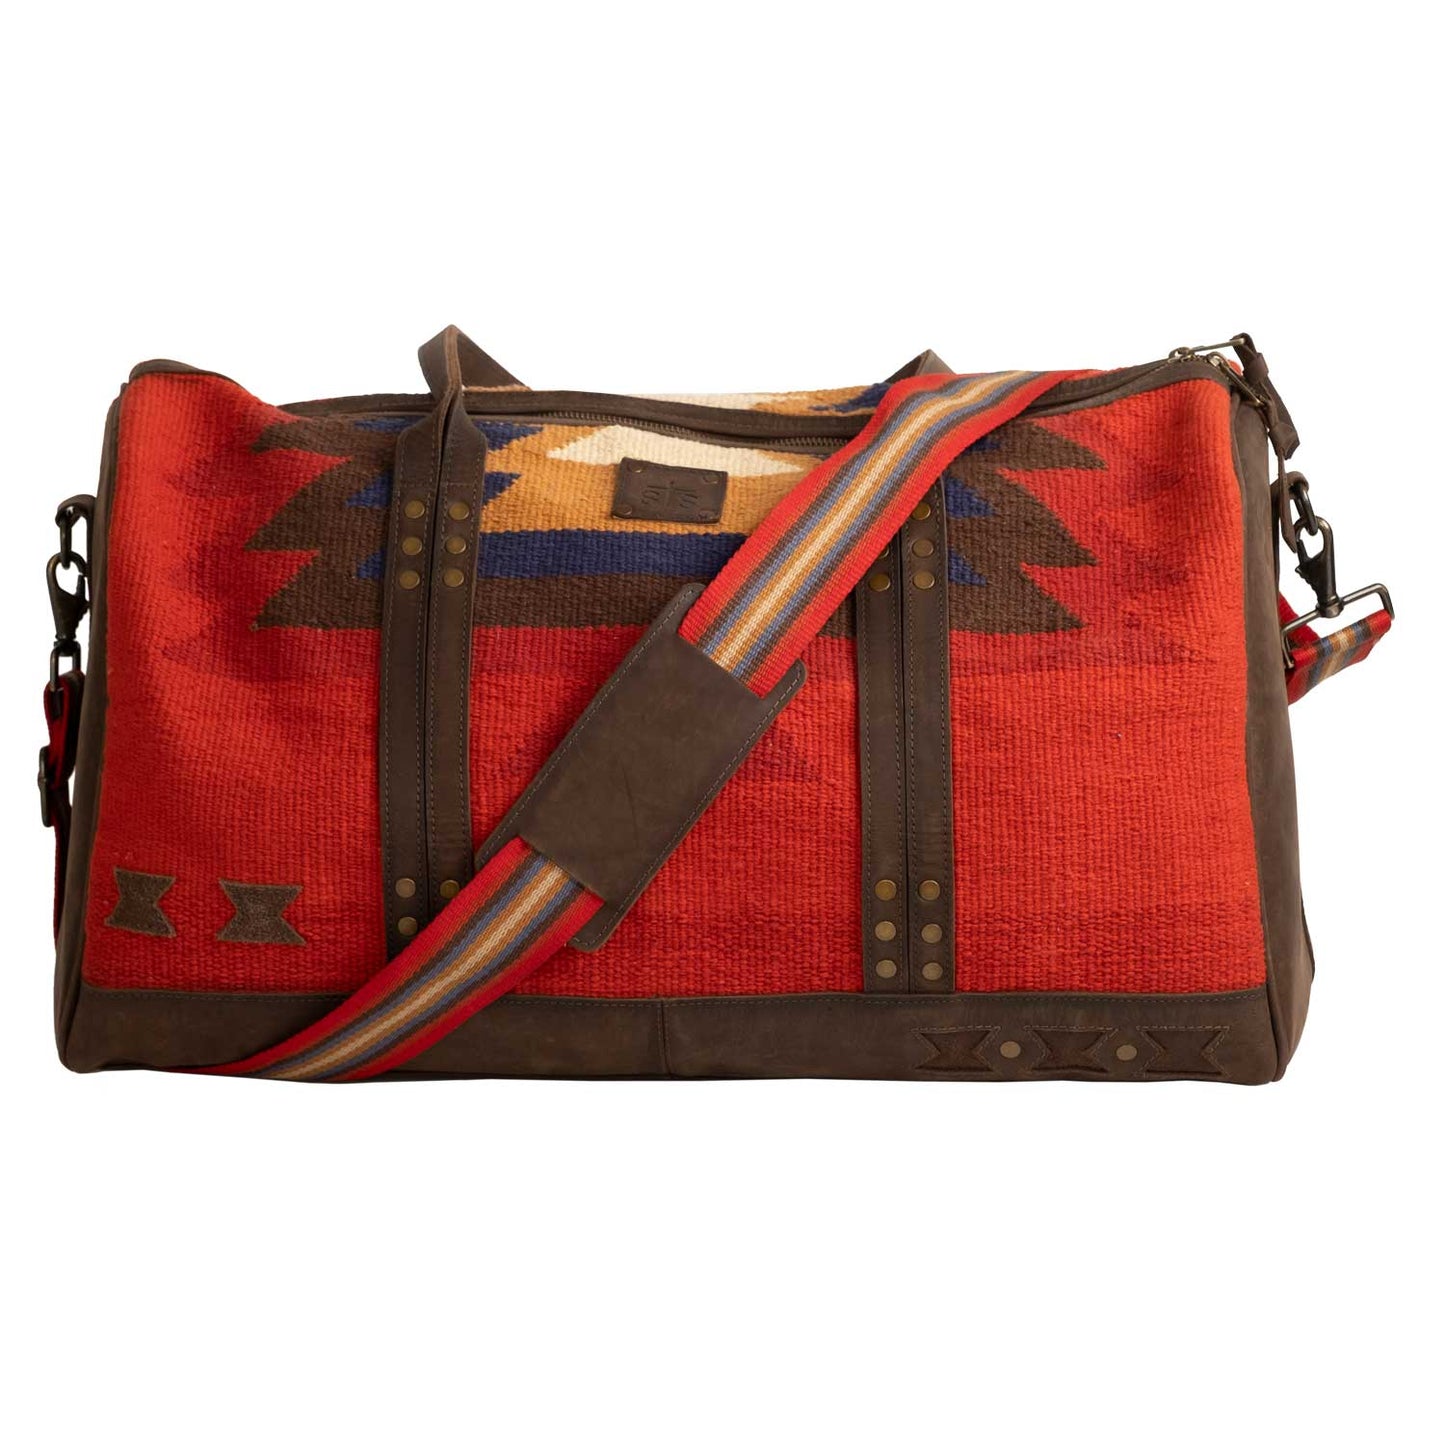 Crimson Sun Backpack Duffle Bag by STS